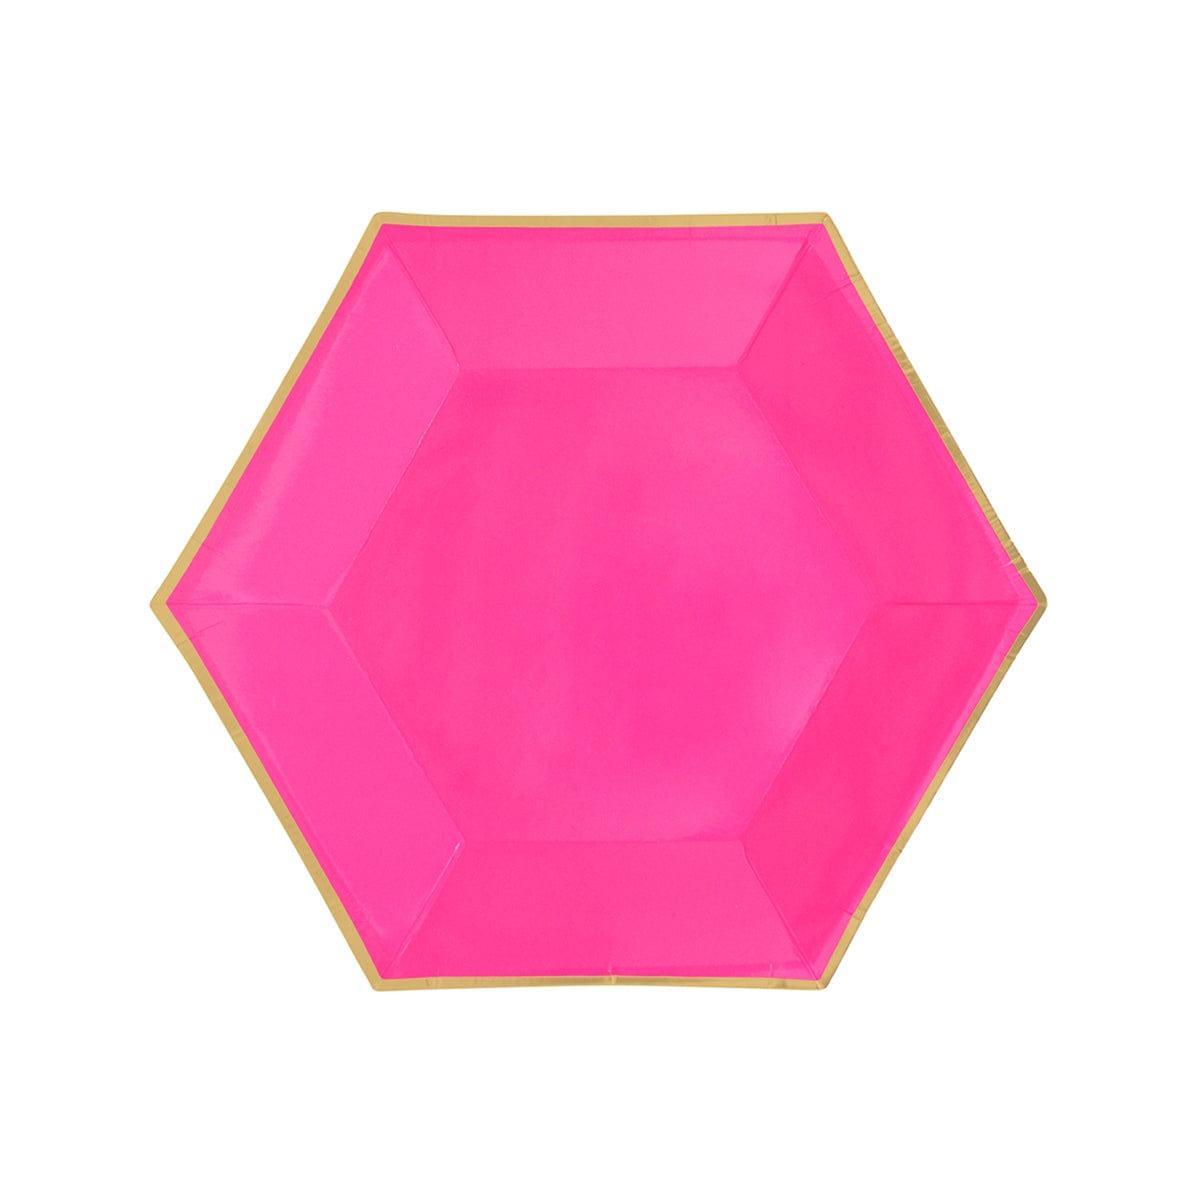 YIWU SANDY PAPER PRODUCTS CO., LTD Everyday Entertaining Hexagon Hot Pink Plates, 9 Inches, 8 Count